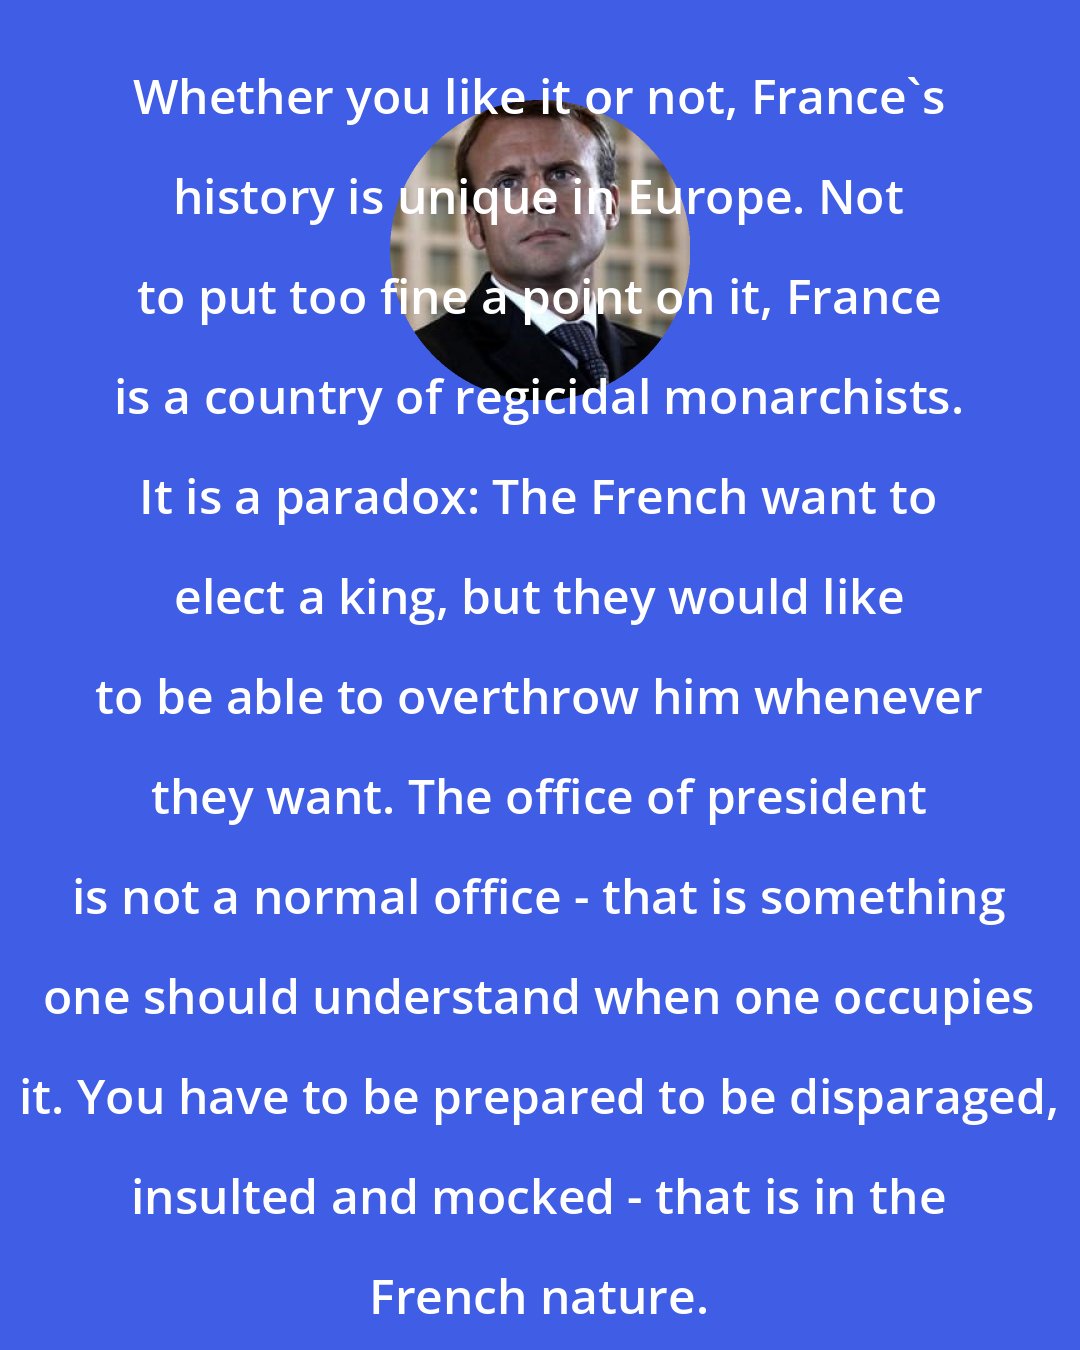 Emmanuel Macron: Whether you like it or not, France's history is unique in Europe. Not to put too fine a point on it, France is a country of regicidal monarchists. It is a paradox: The French want to elect a king, but they would like to be able to overthrow him whenever they want. The office of president is not a normal office - that is something one should understand when one occupies it. You have to be prepared to be disparaged, insulted and mocked - that is in the French nature.